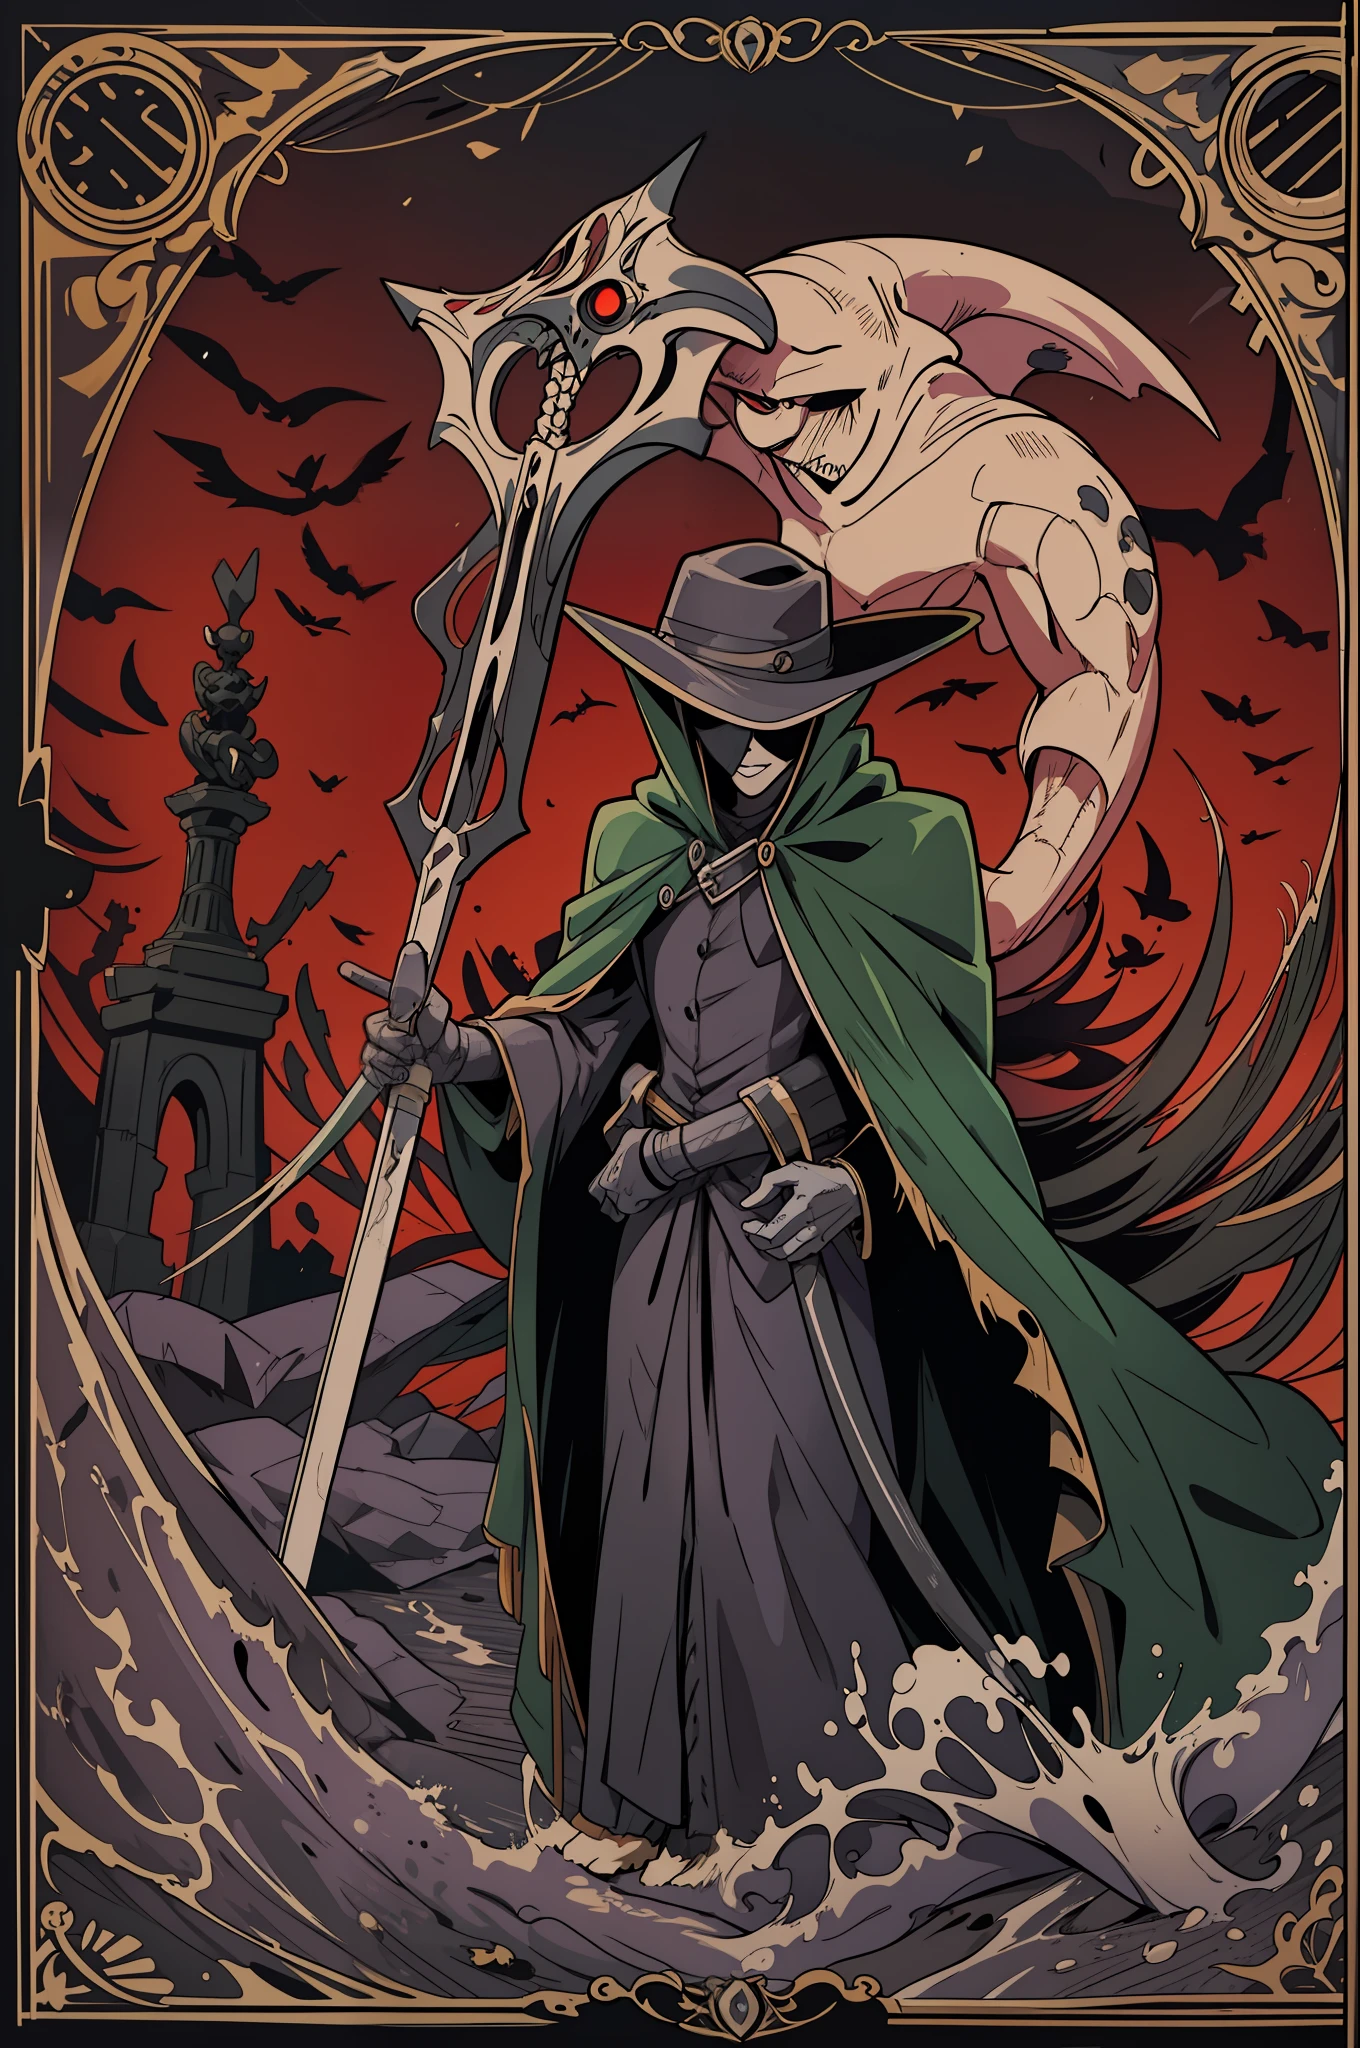 "best quality, ultra-detailed, masterful illustration, Izuku Midoriya as the grim reaper wearing plague doctor's clothes, holding a menacing scythe, standing in a cementary bathed in the crimson moonlight"